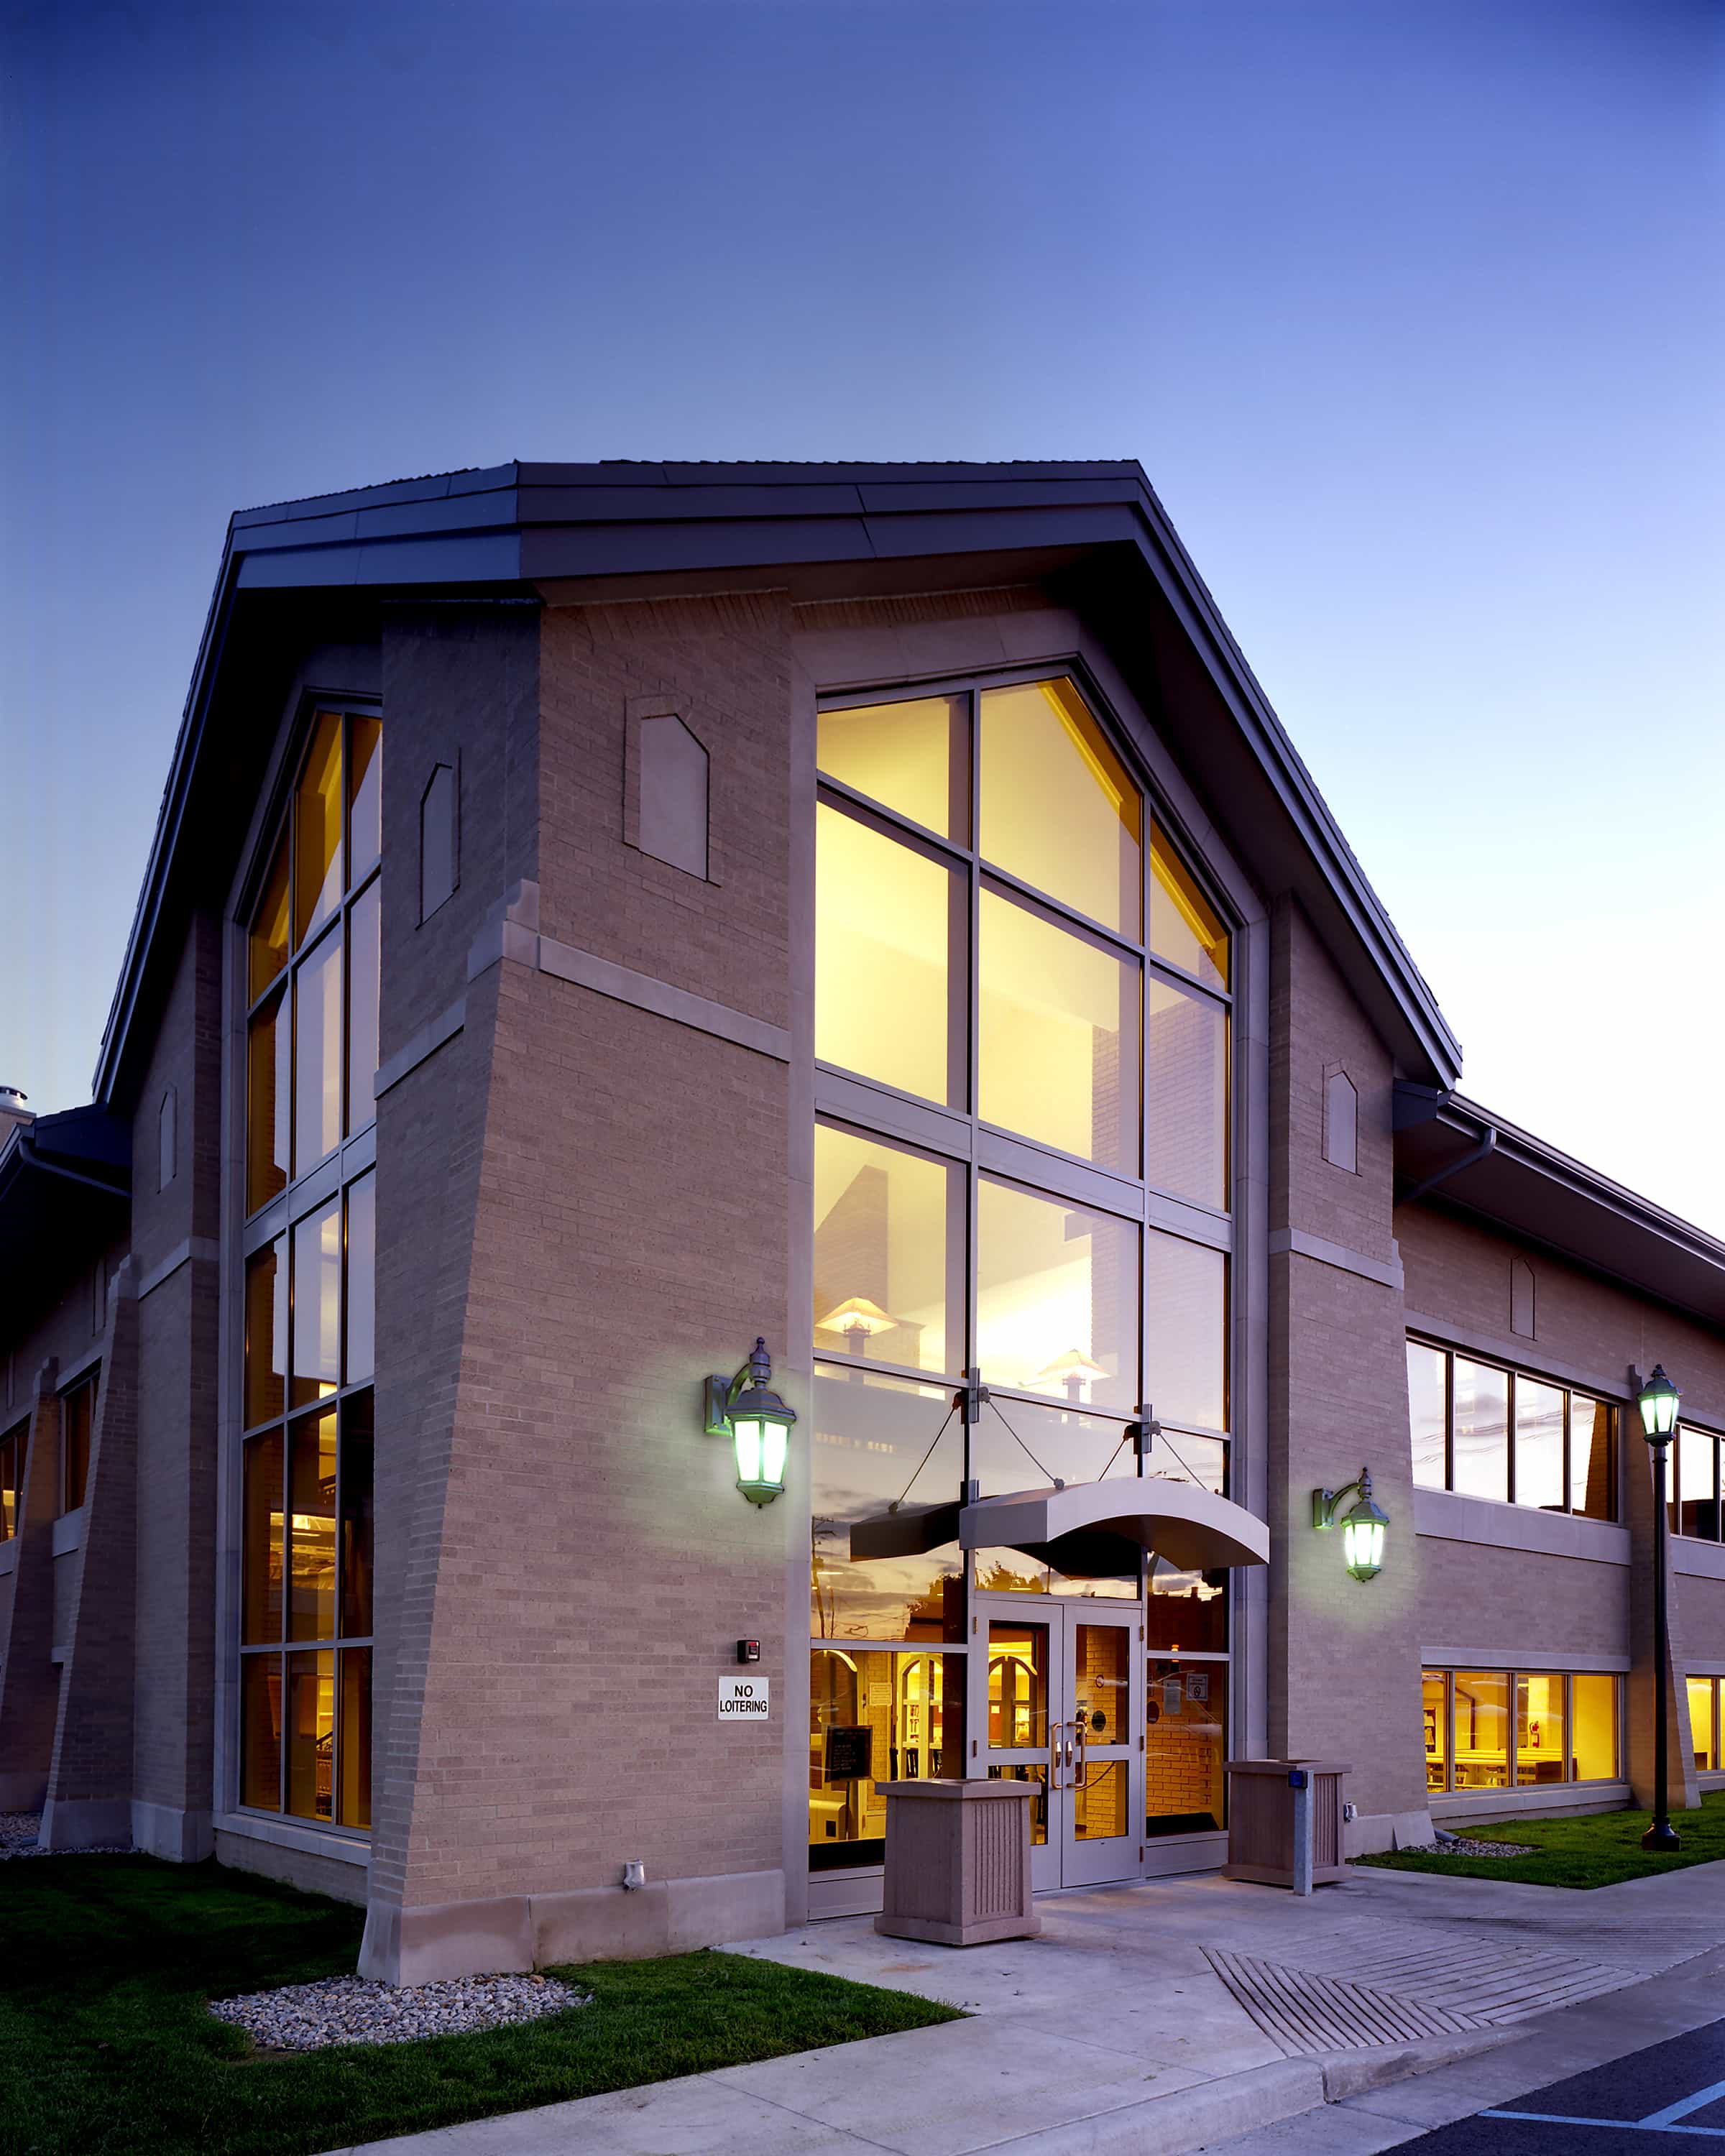 NEW CASTLE- HENRY COUNTY PUBLIC LIBRARY – krM Architecture